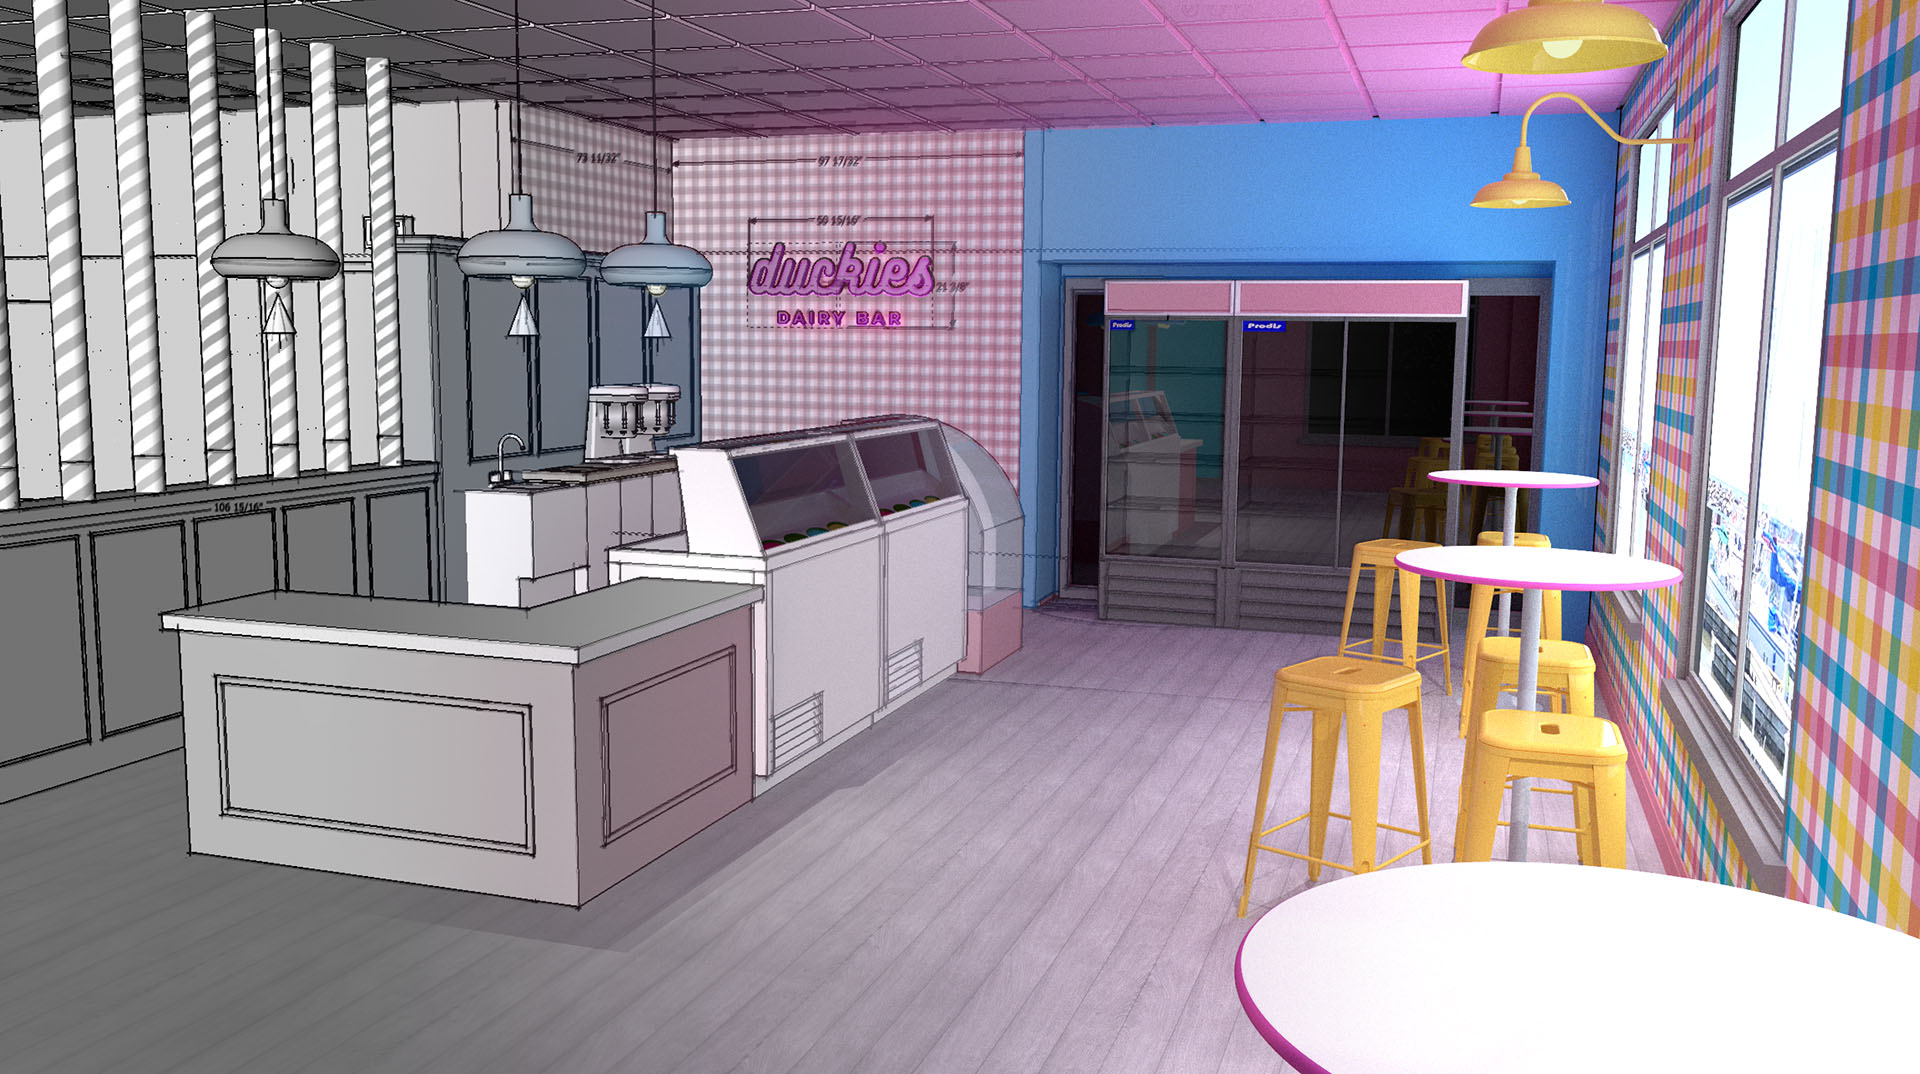 3D render of the interior of Duckies Dairy Bar